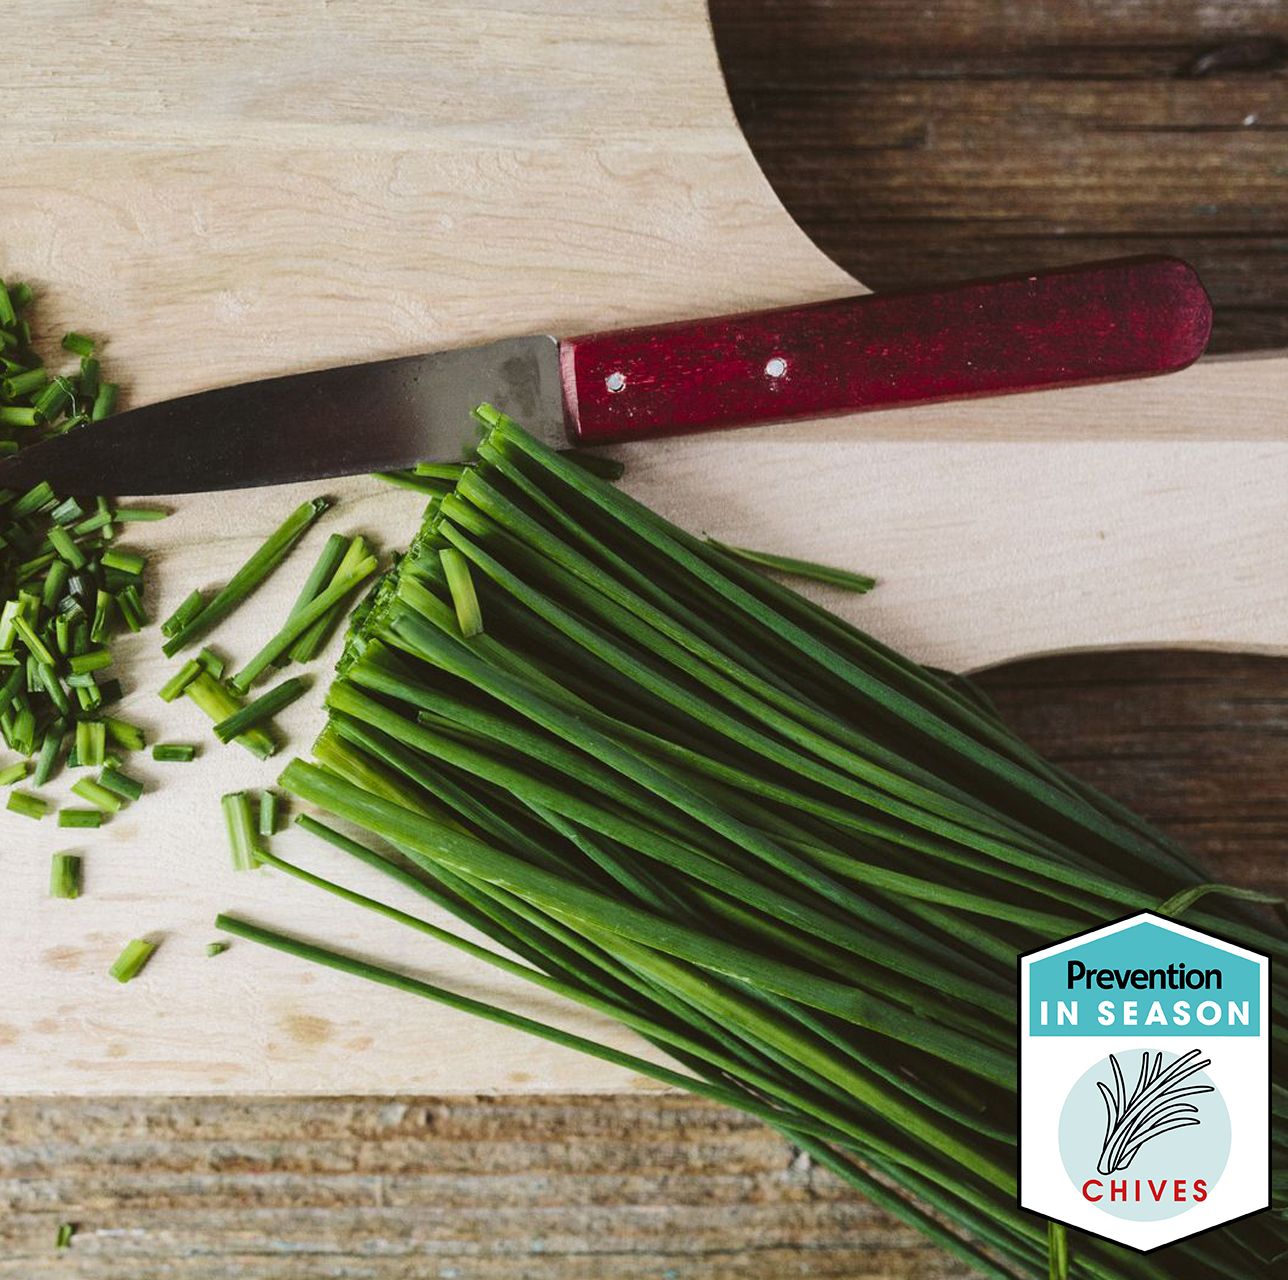 Our Best Tips for Cooking With Fresh Chives—and Nope, They’re Not the Same as Scallions